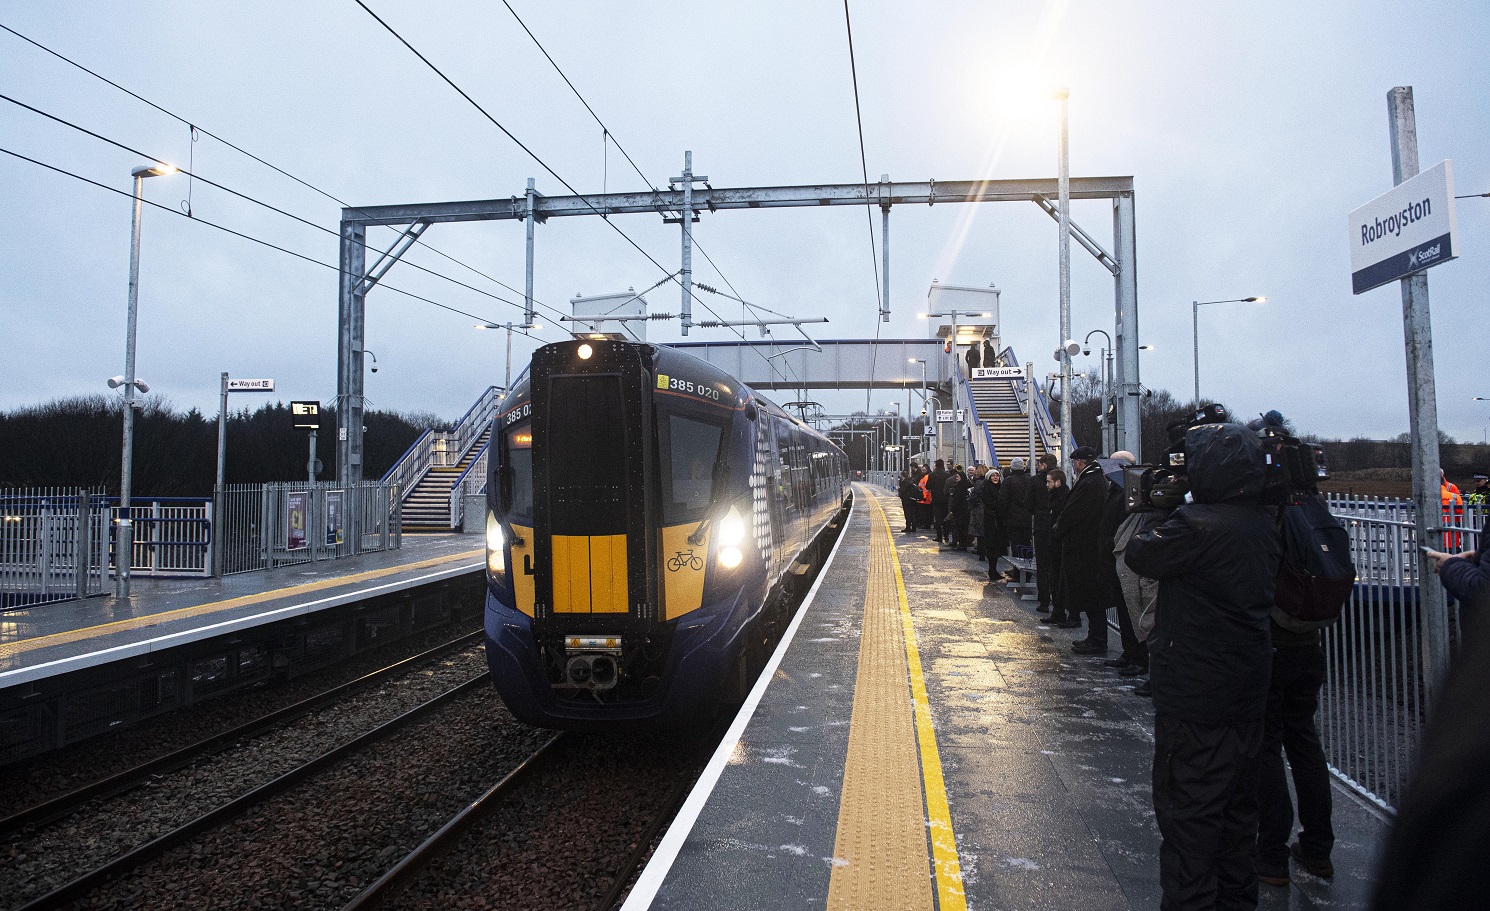 In pictures: Robroyston Station opens